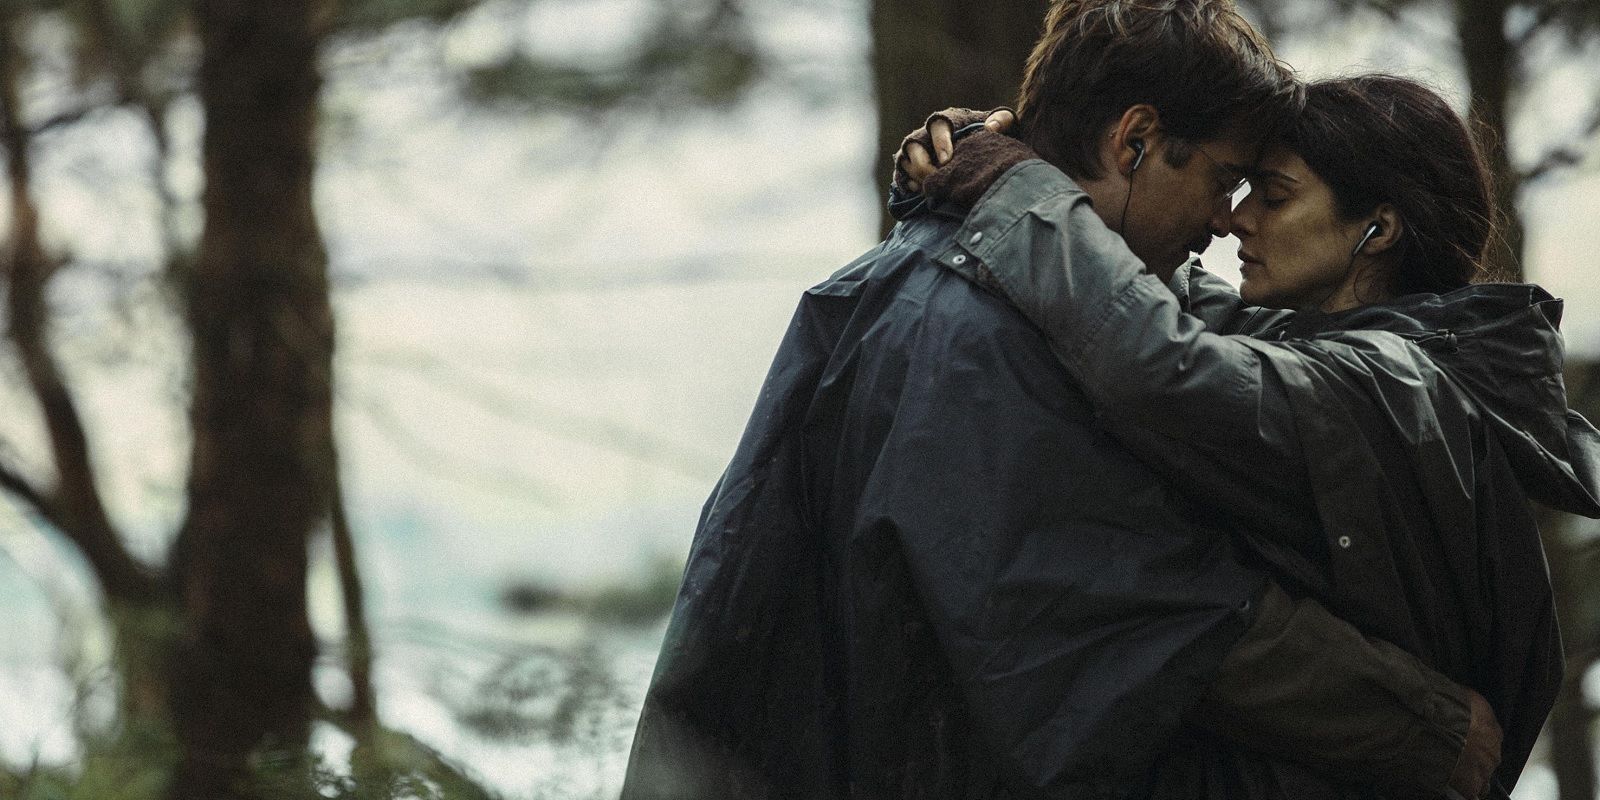 Colin Farrell and Rachel Weisz hugging in The Lobster